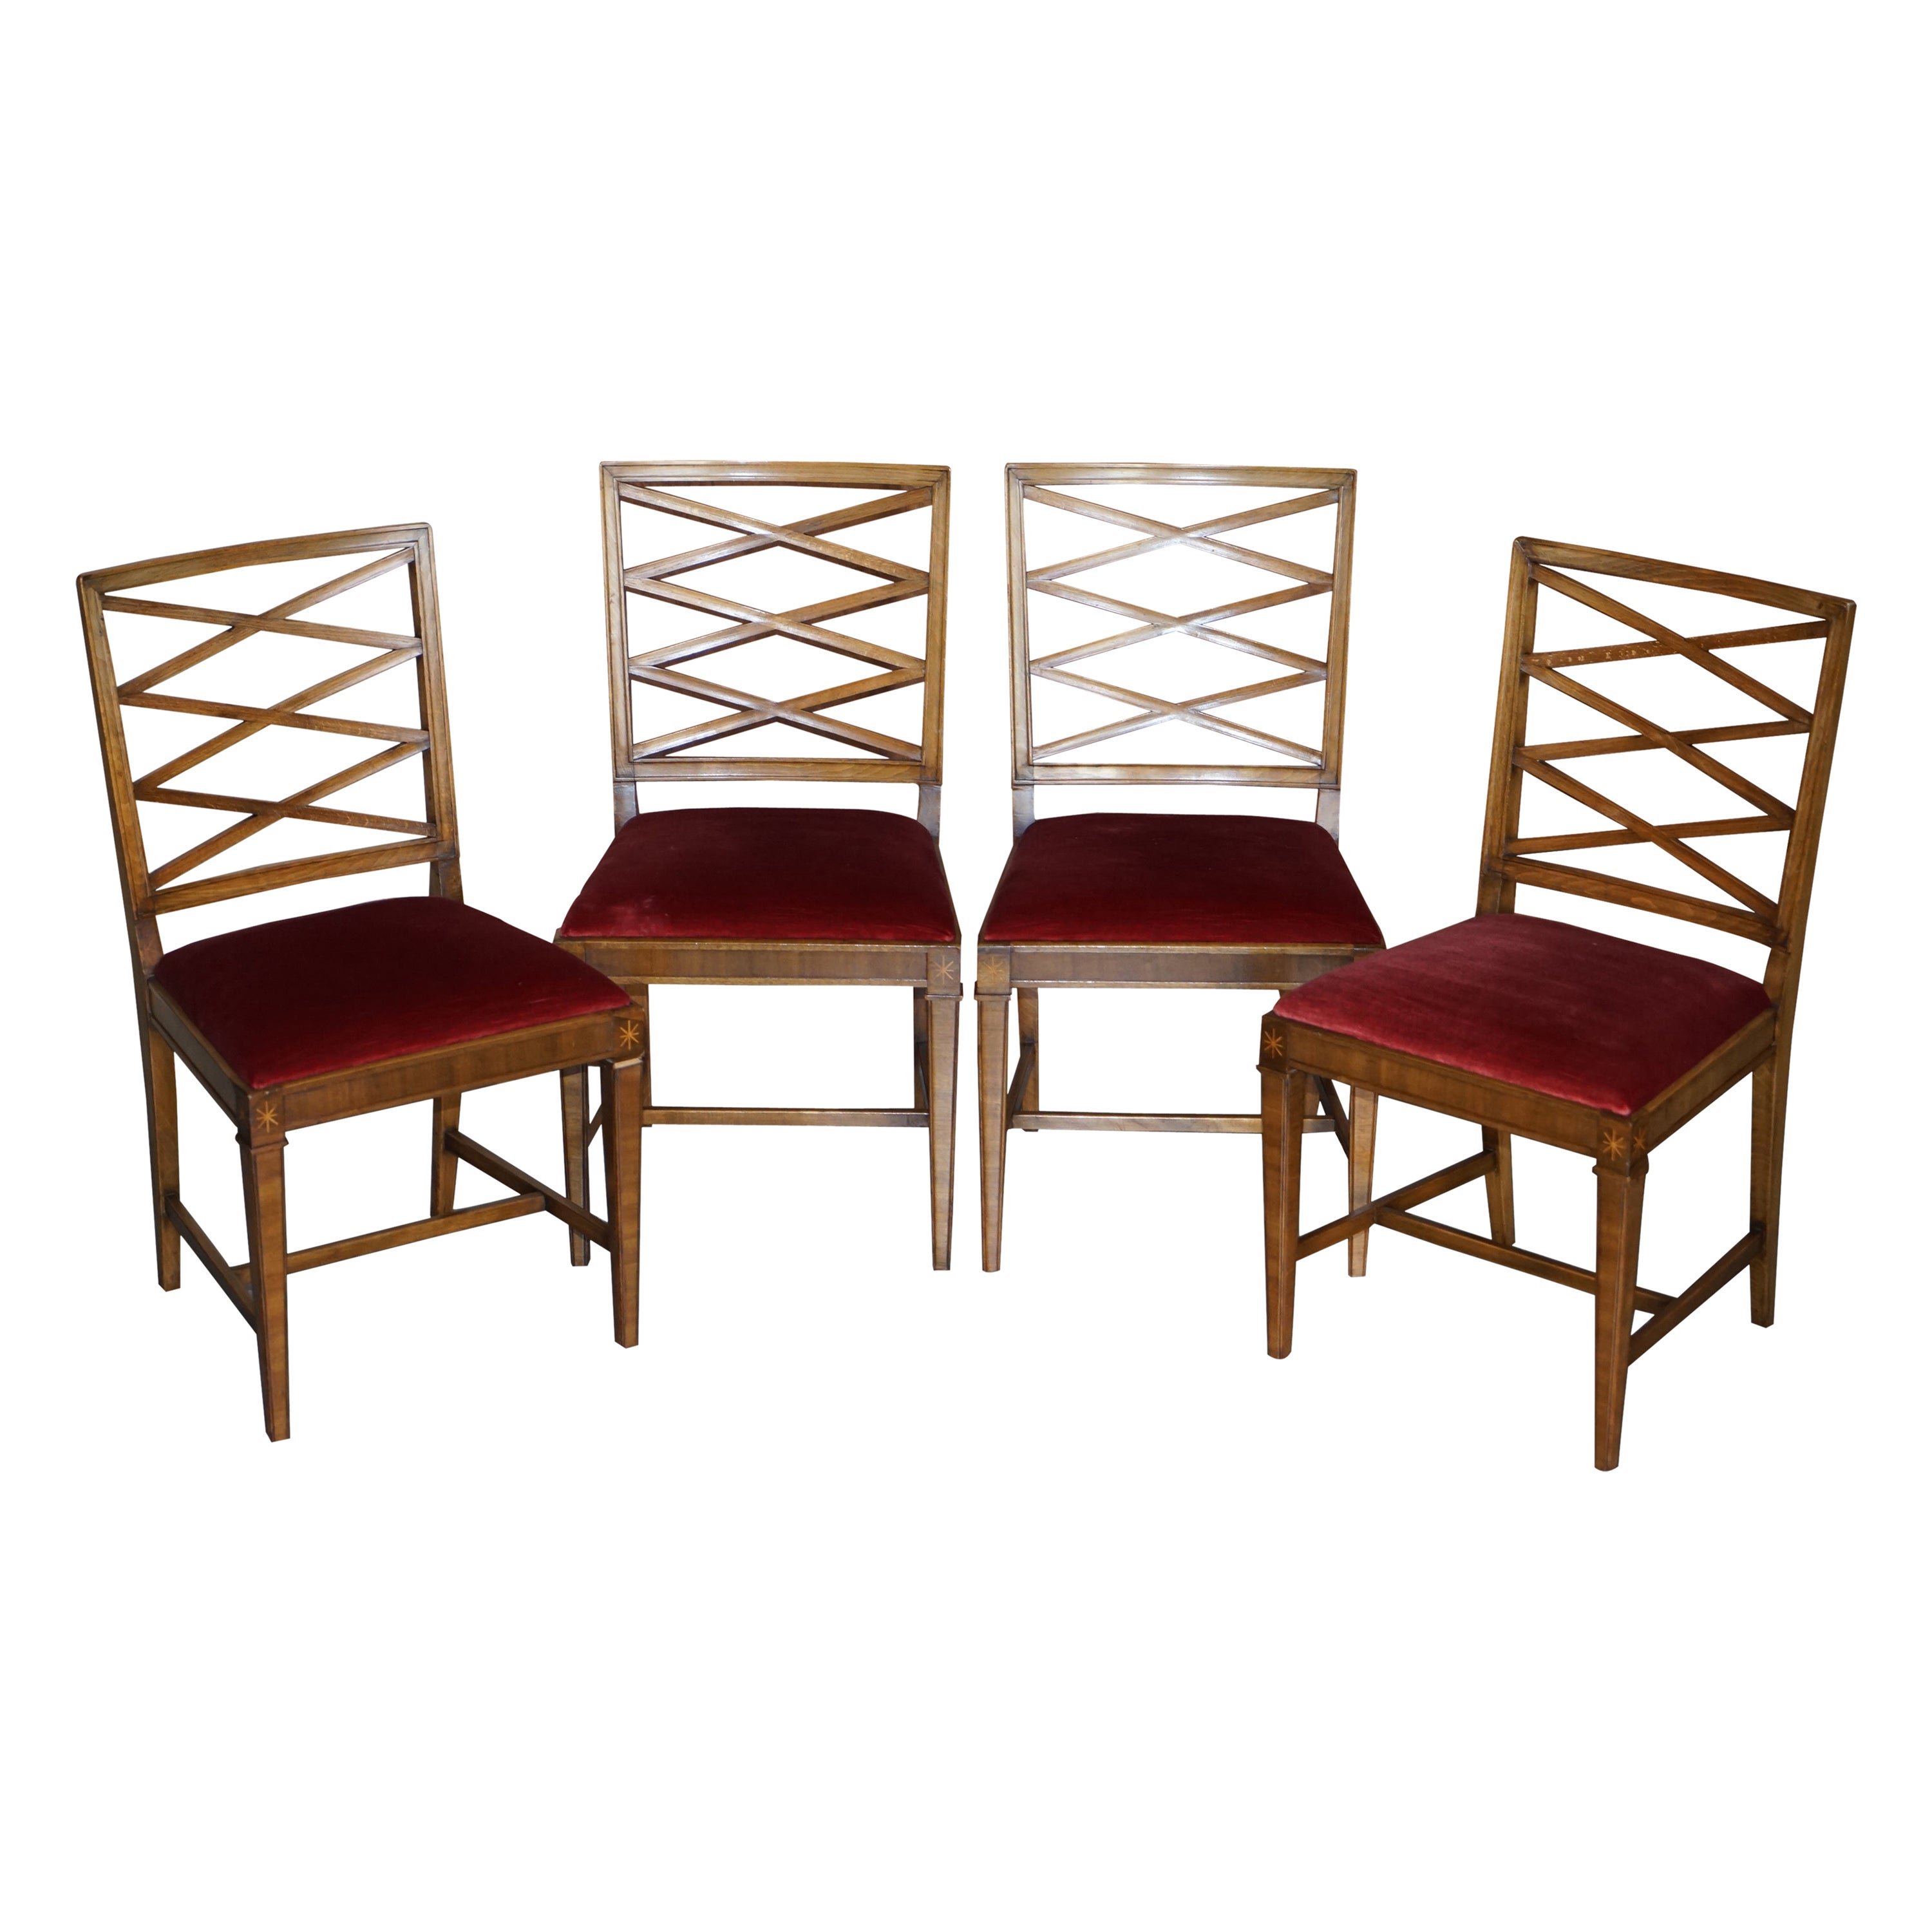 Suite of Four Swedish Walnut & Beech Wood Dining Chairs For Sale